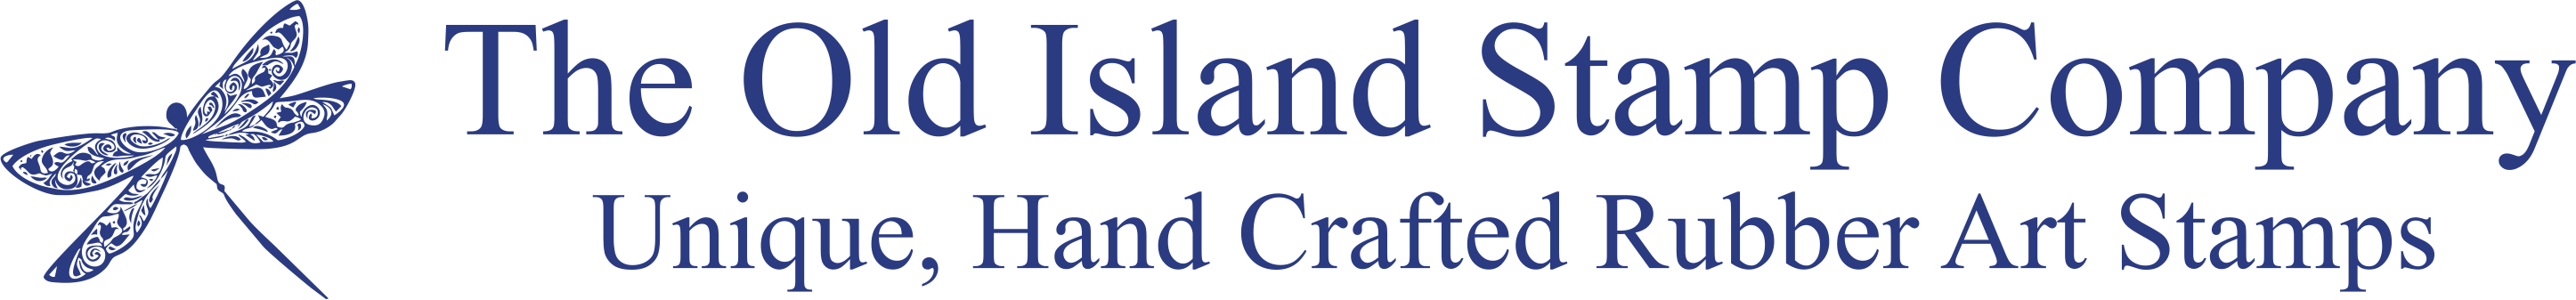 The Old Island Stamp Company